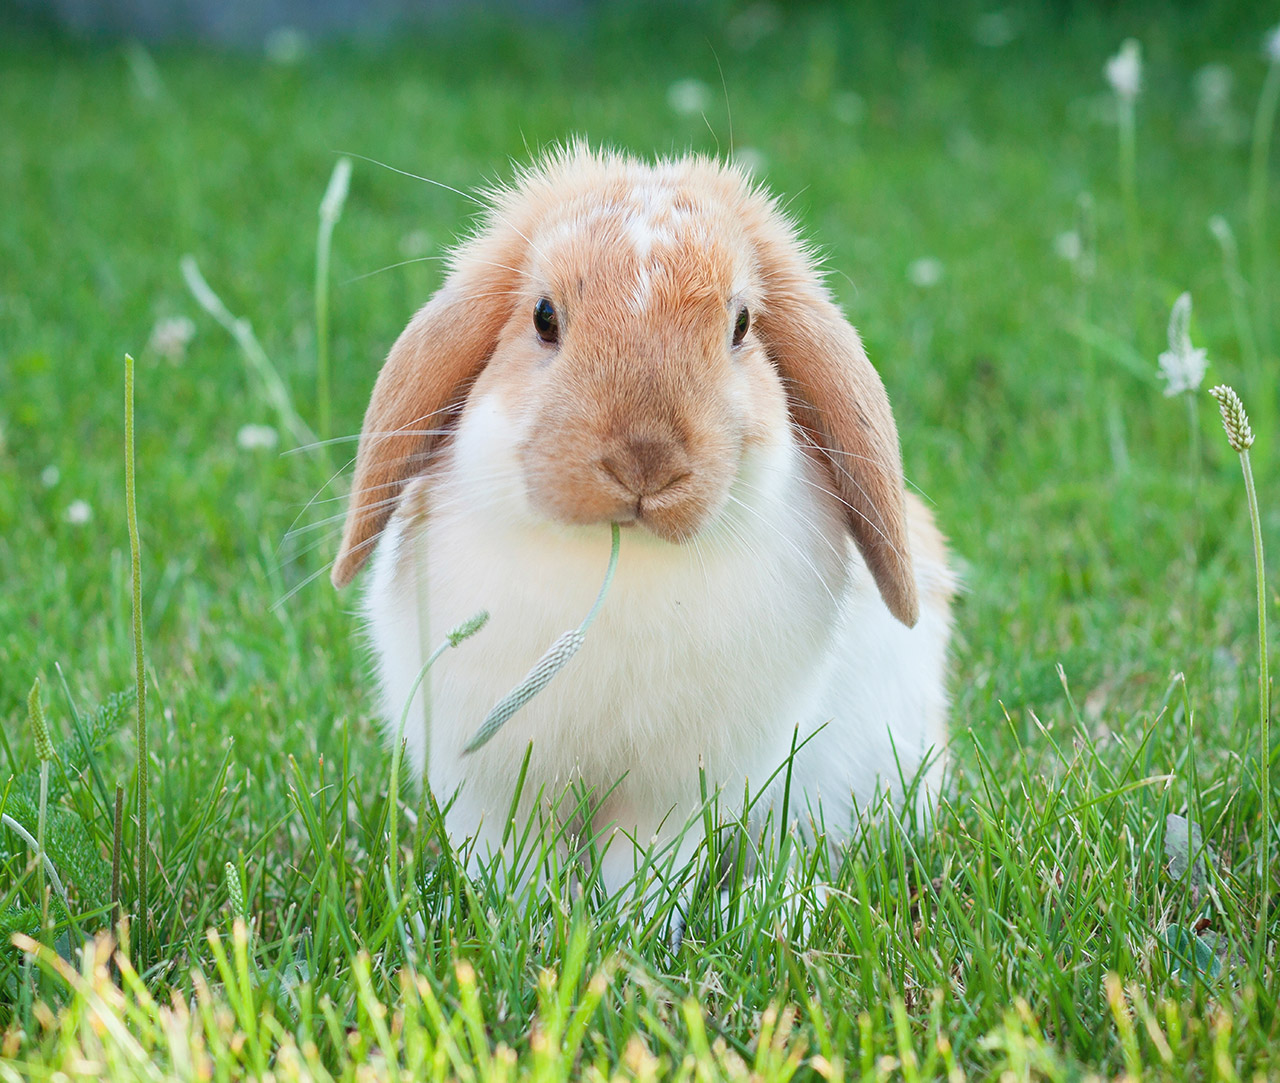 Rabbit outside on the grass